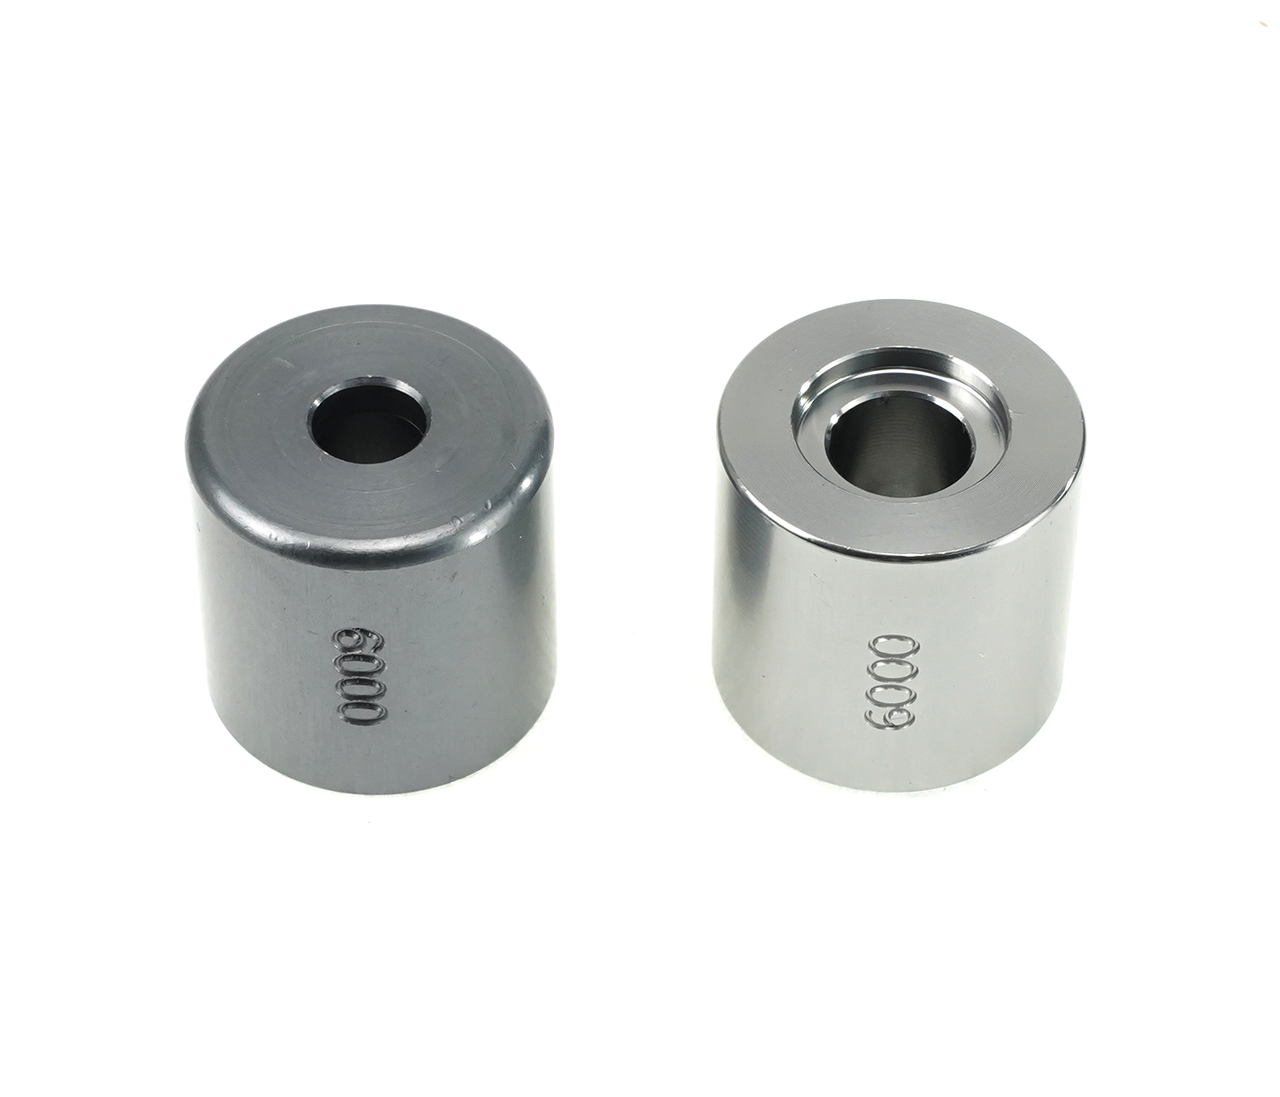 HT 6000 Outer - Outer Bearing Guide for Bearing Press (BRT-005 or BRT-050)- single guide only, image shows both sides of guide